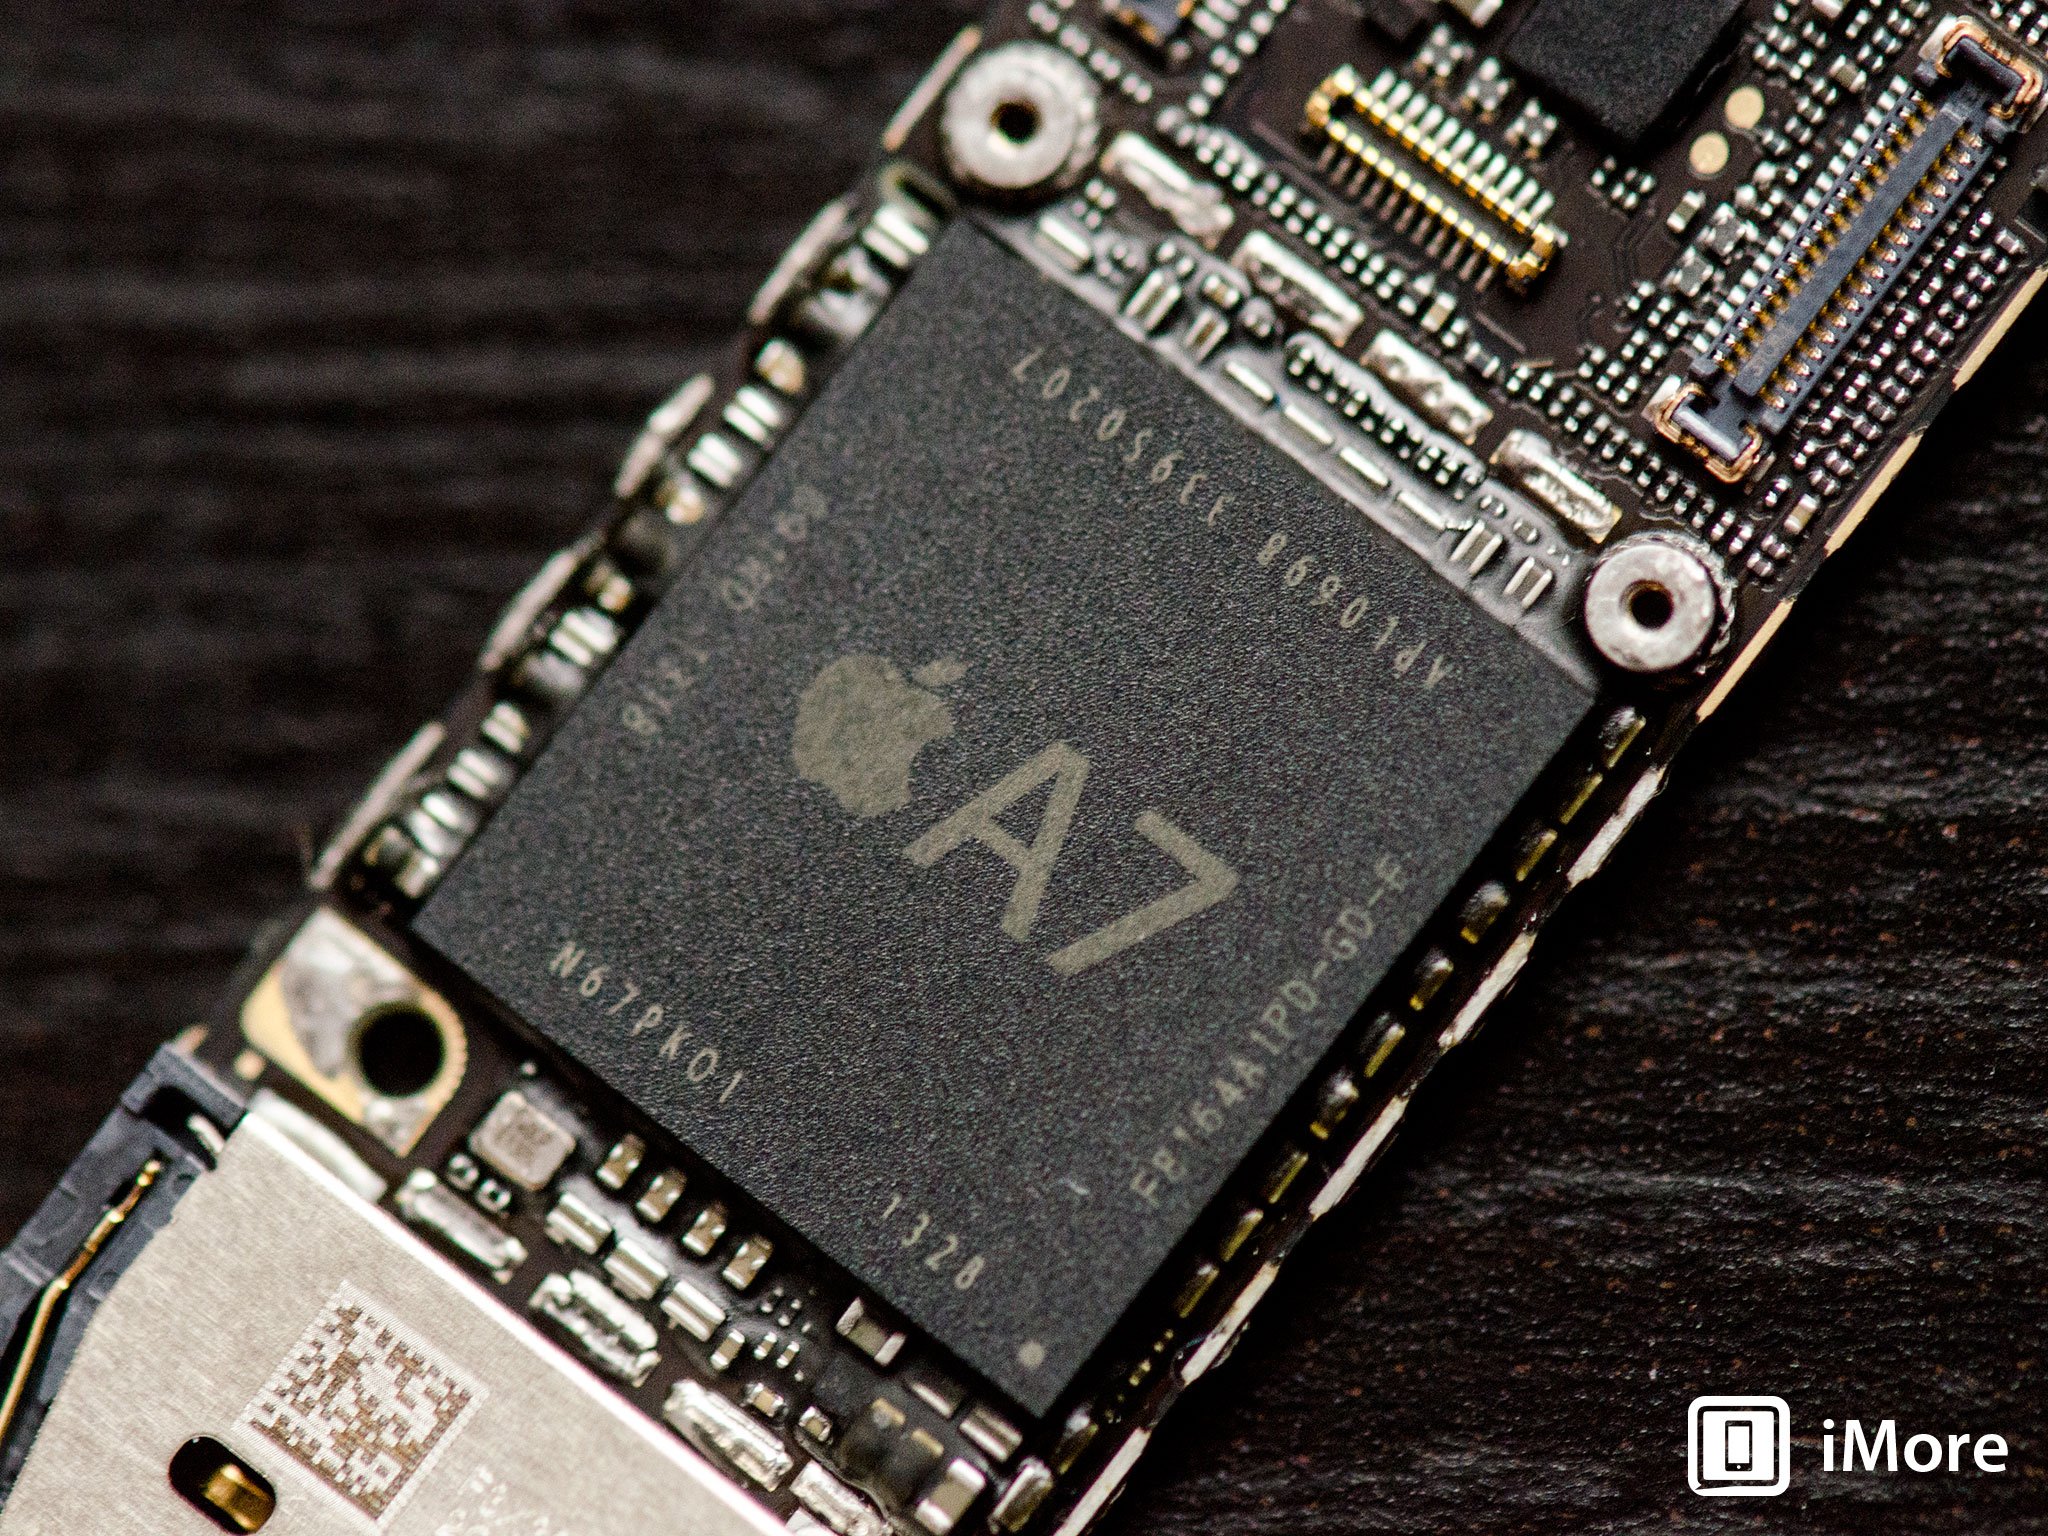 Everything you need to know about Apple's all-new 64-bit A7 system-on-a-chip, and the next generation Cyclone processor